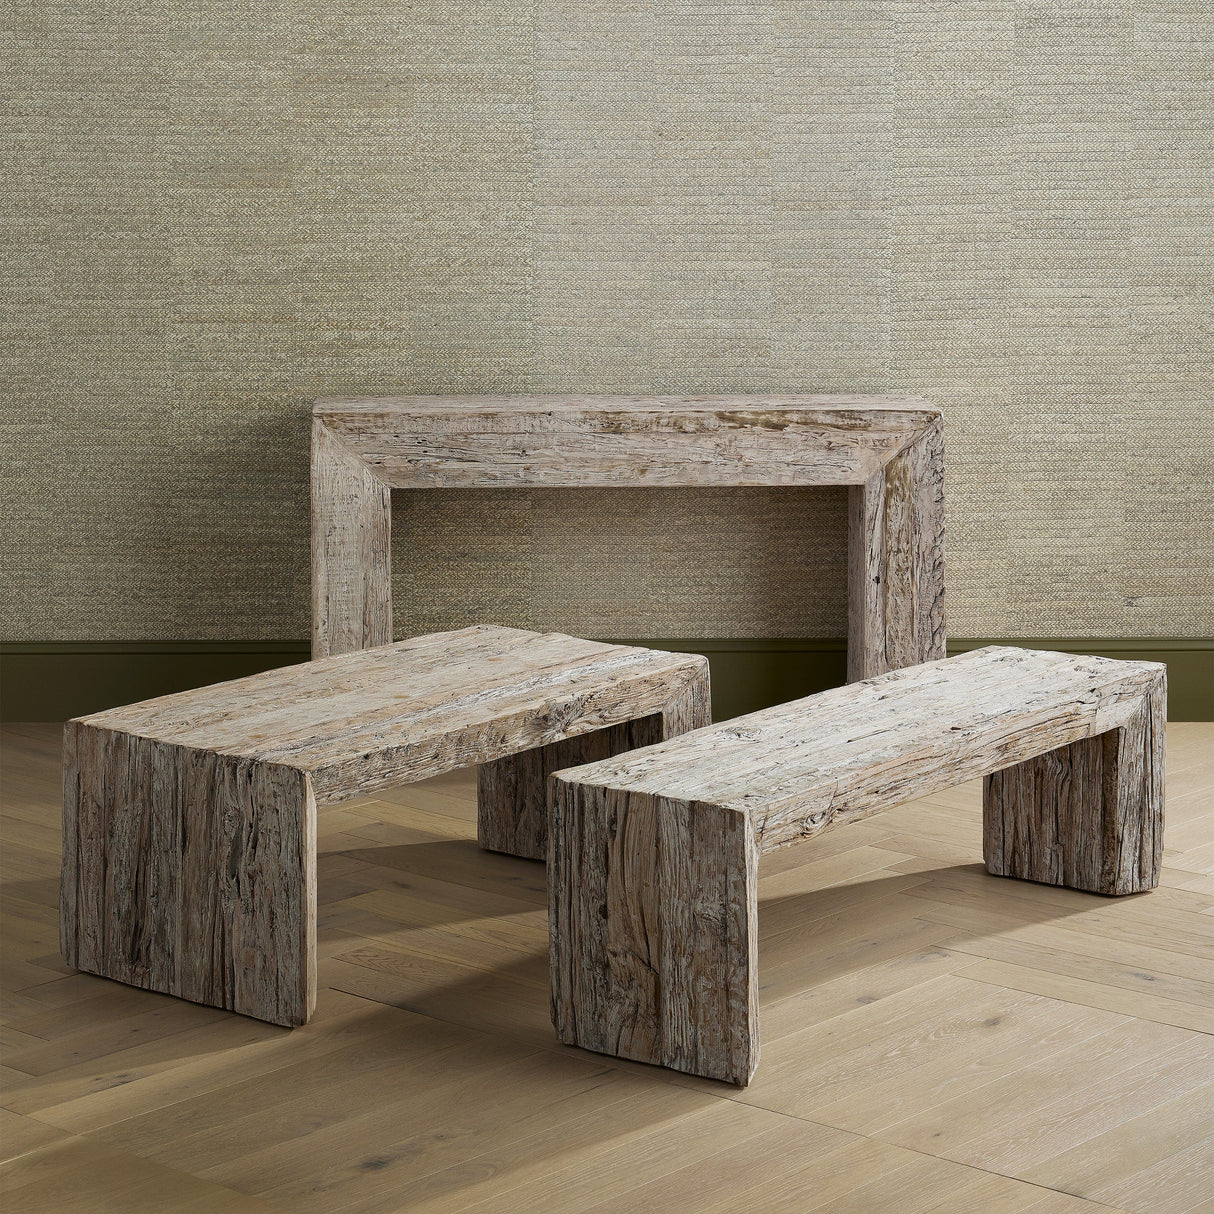 Currey and Company Kanor Bench Furniture currey-co-3000-0216